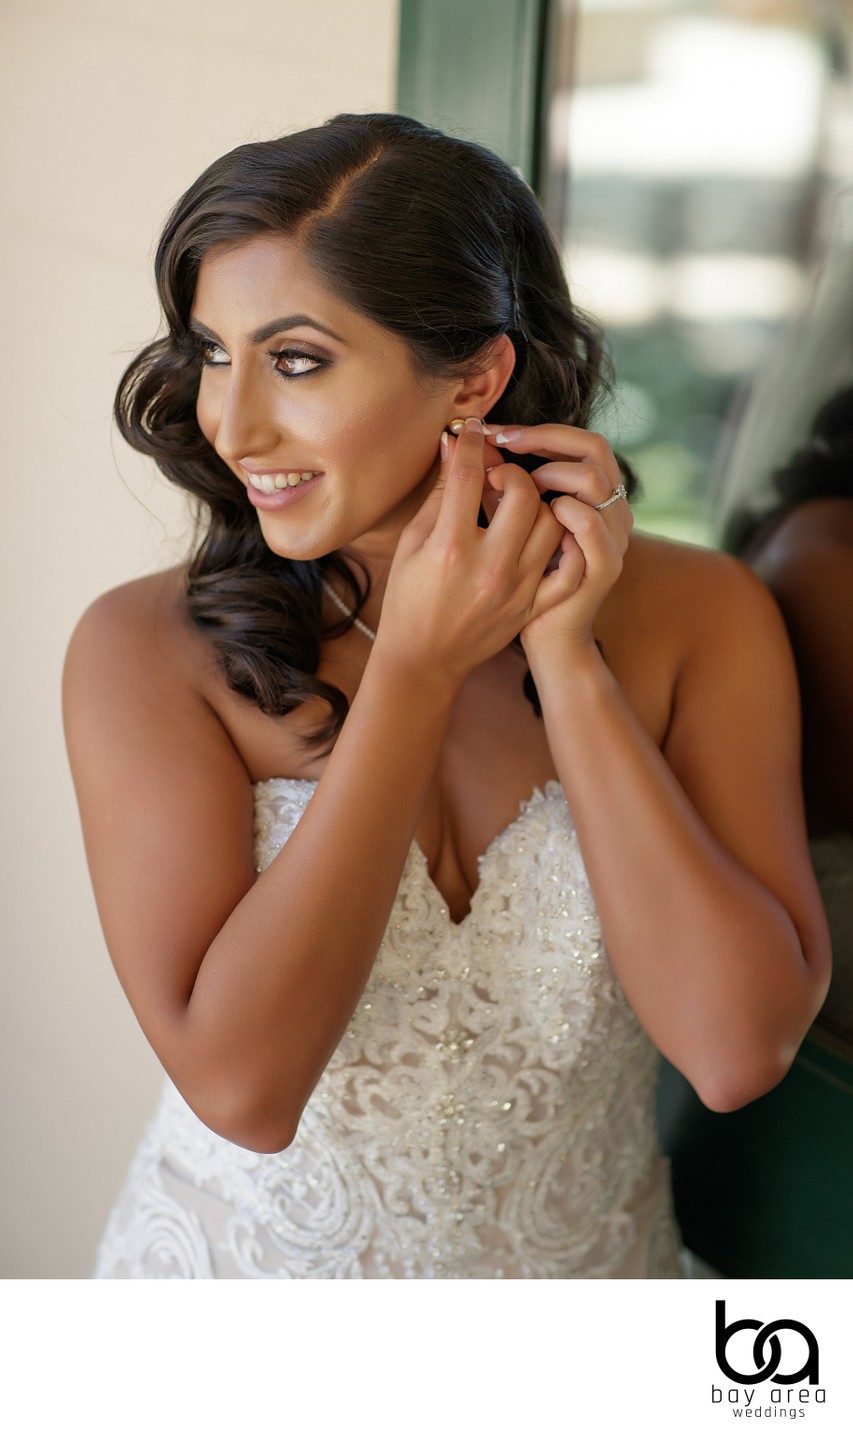 Bride Photography in the Bay Area